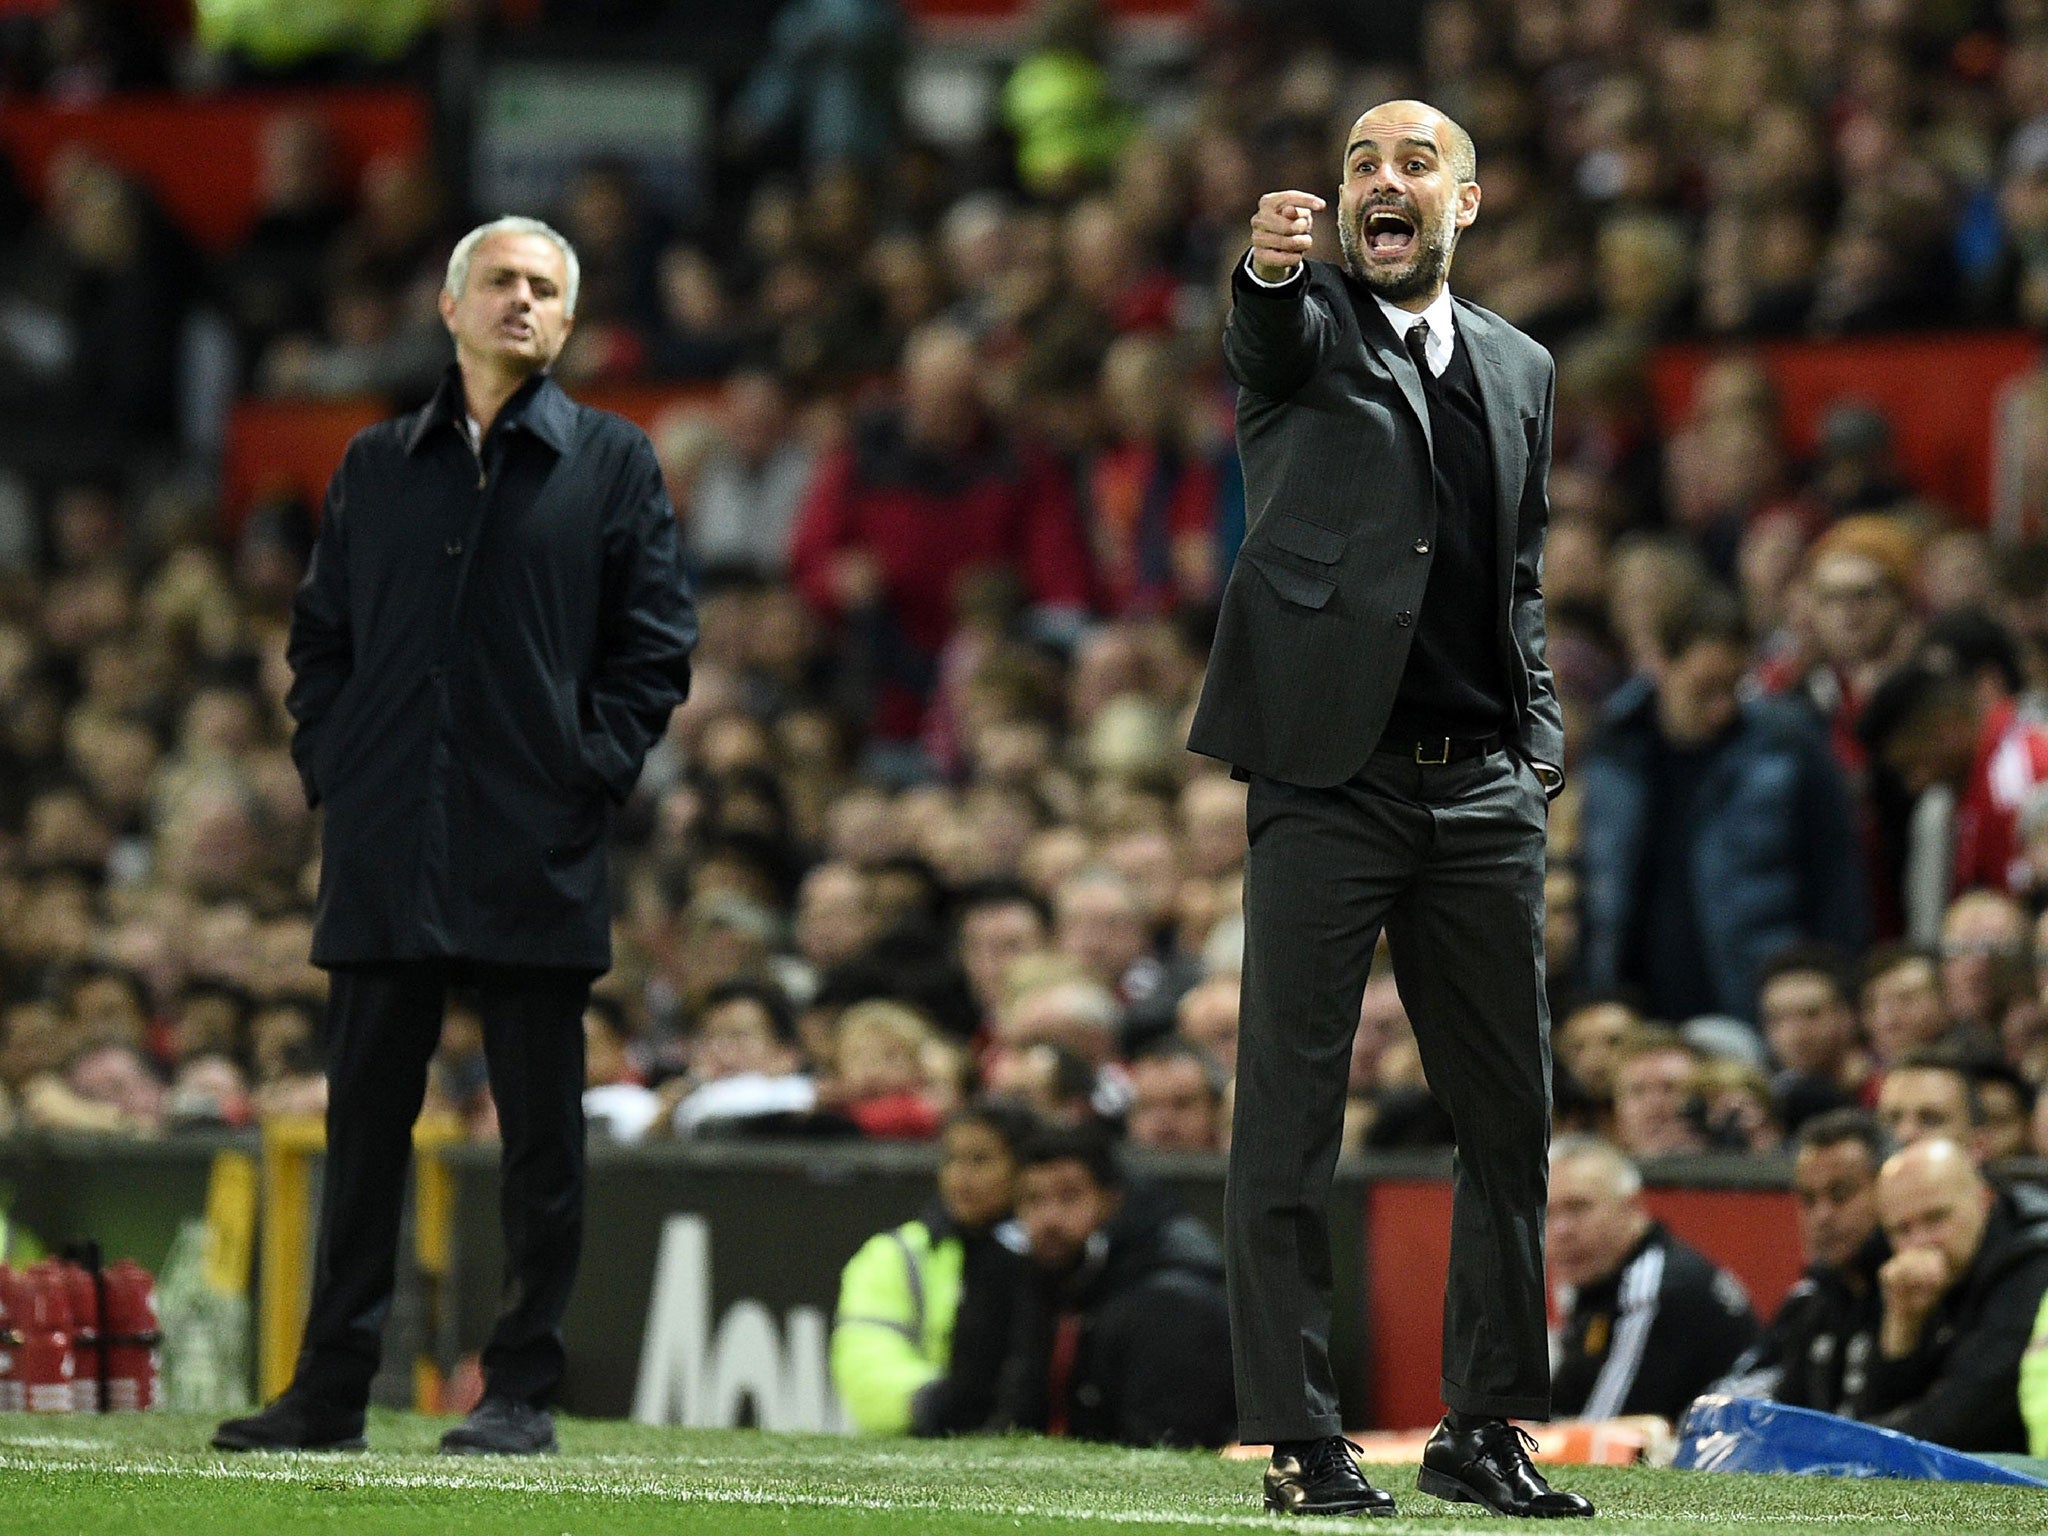 Both Mourinho and Guardiola have failed to live up to the hype